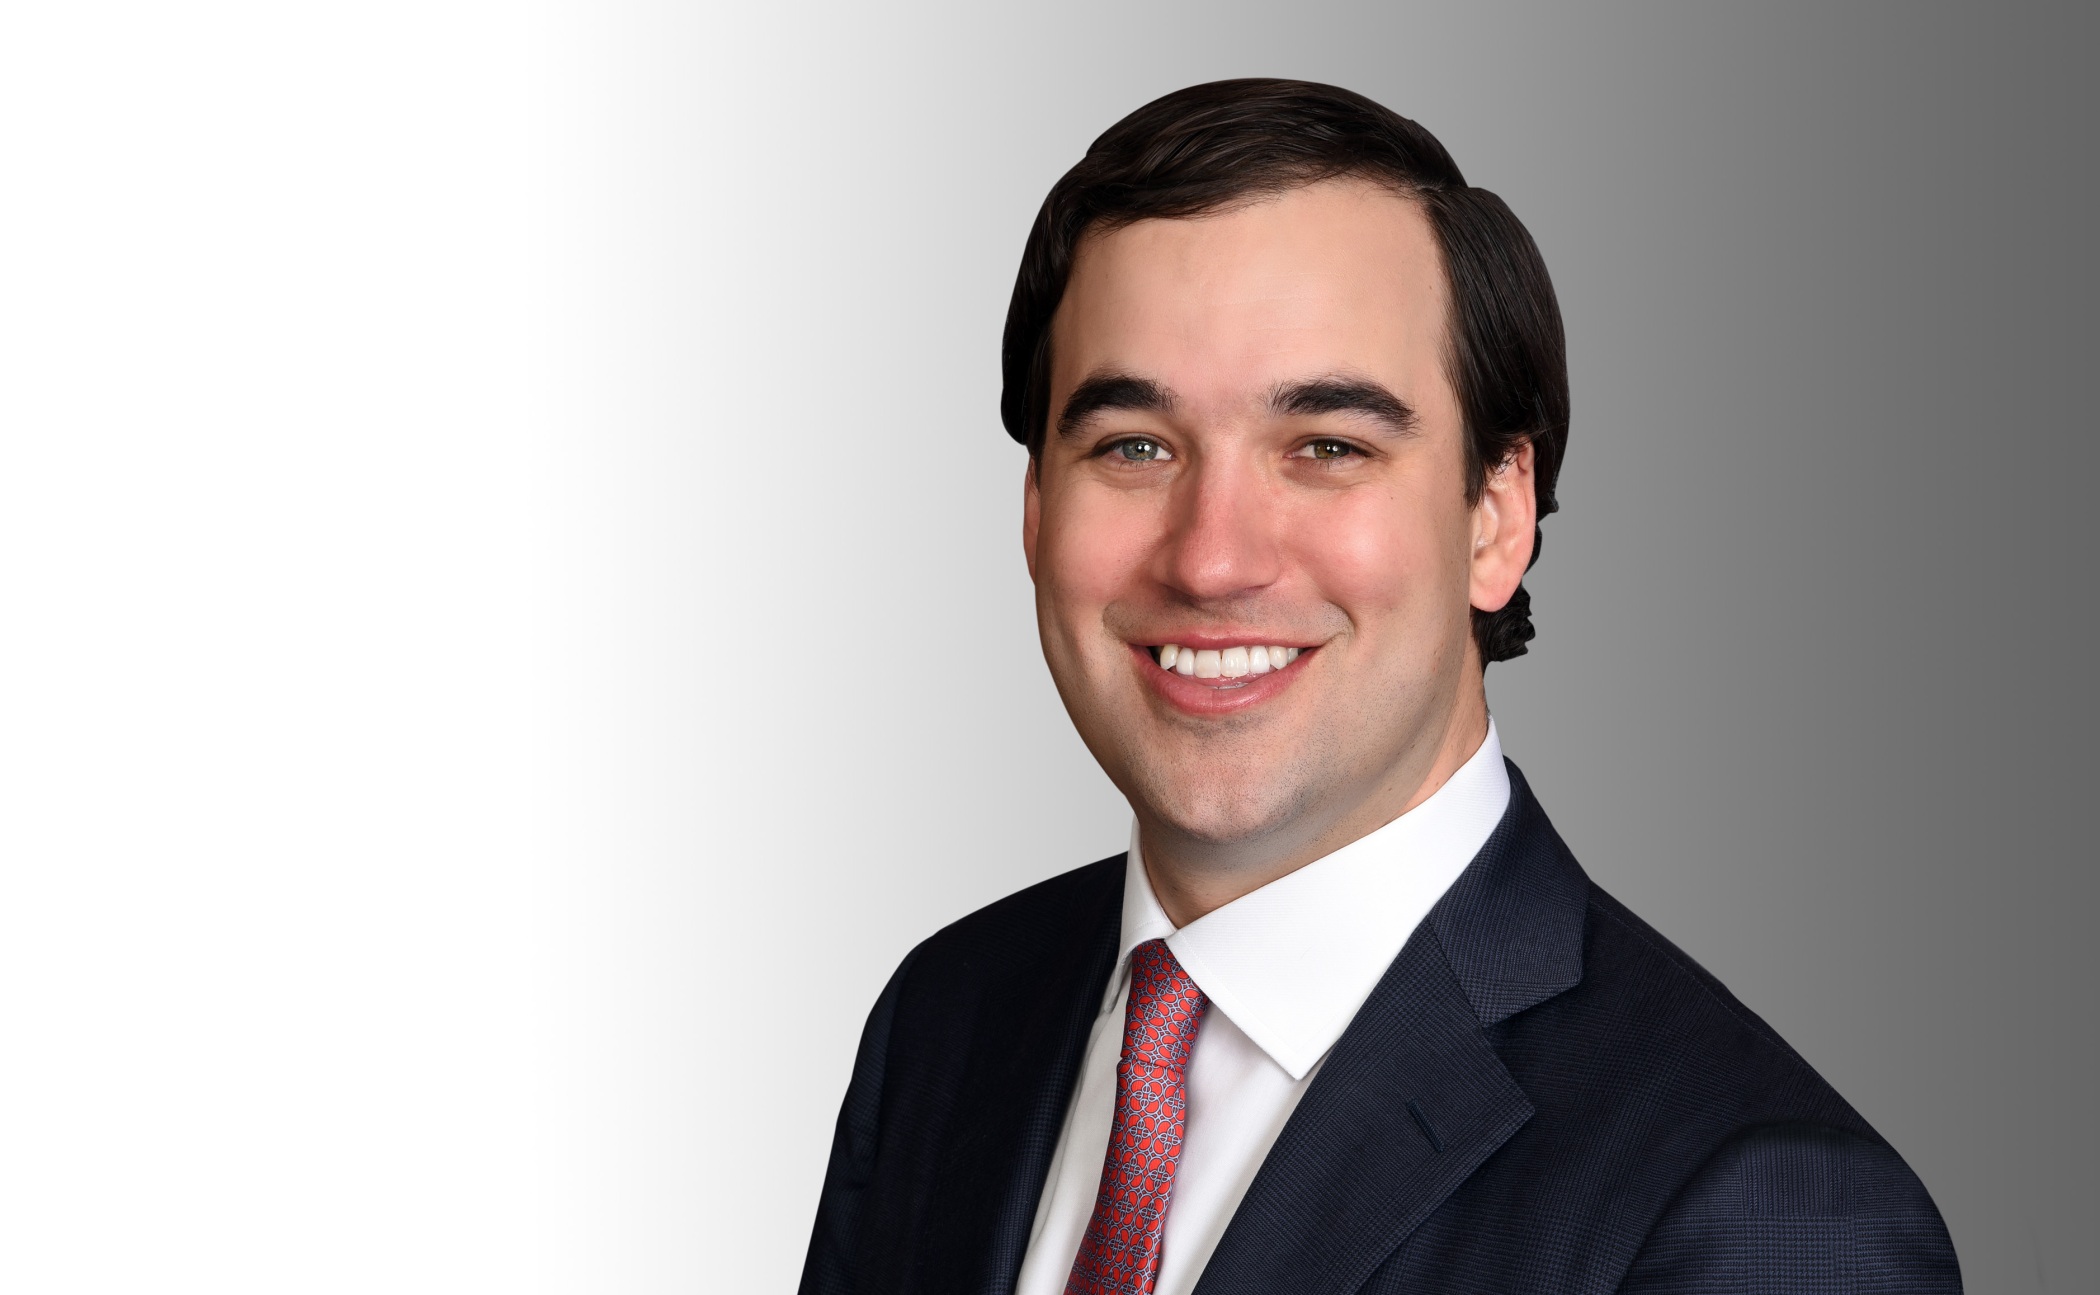 Chad Lavender, based in Dallas, is taking on a new leadership role at Newmark. (Newmark)